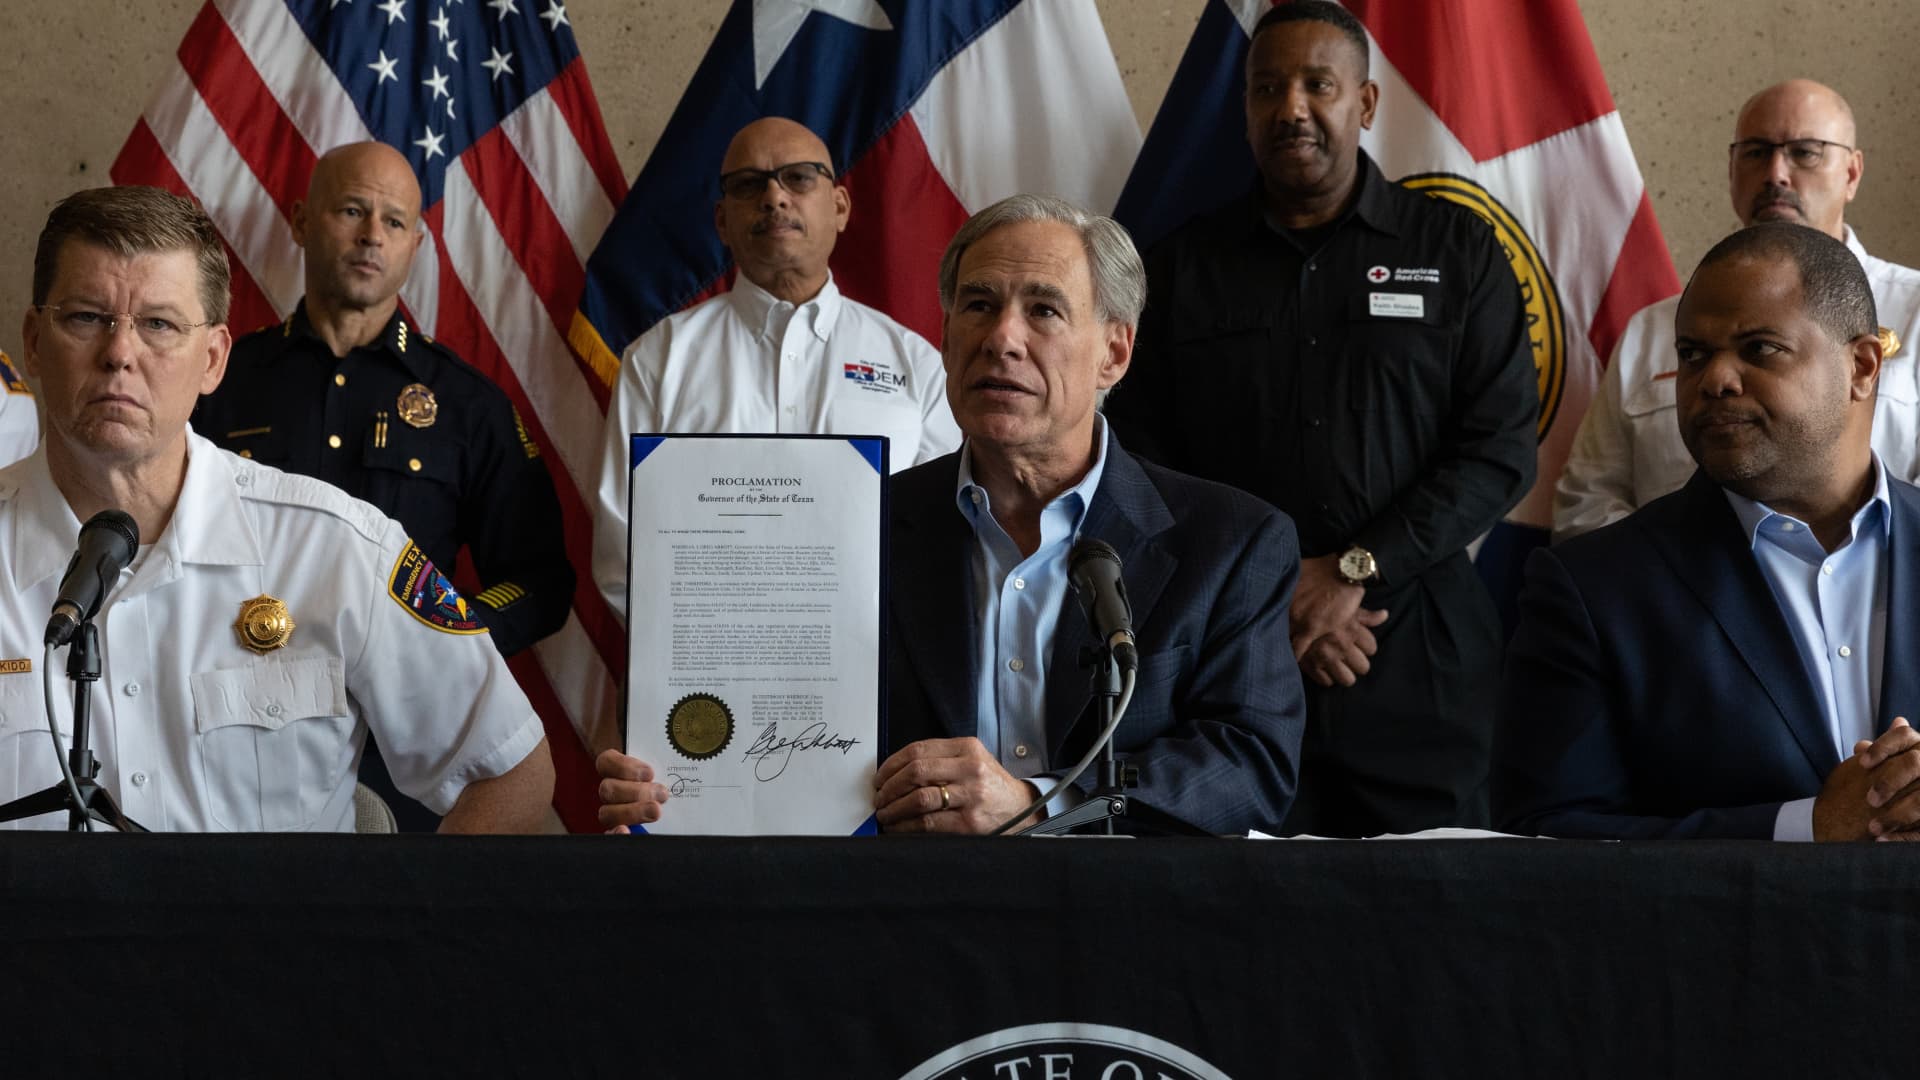 Greg Abbott, governor of Texas, holds up a signed disaster declaration during a news conference in Dallas, Texas, US, on Tuesday, Aug. 23, 2022.